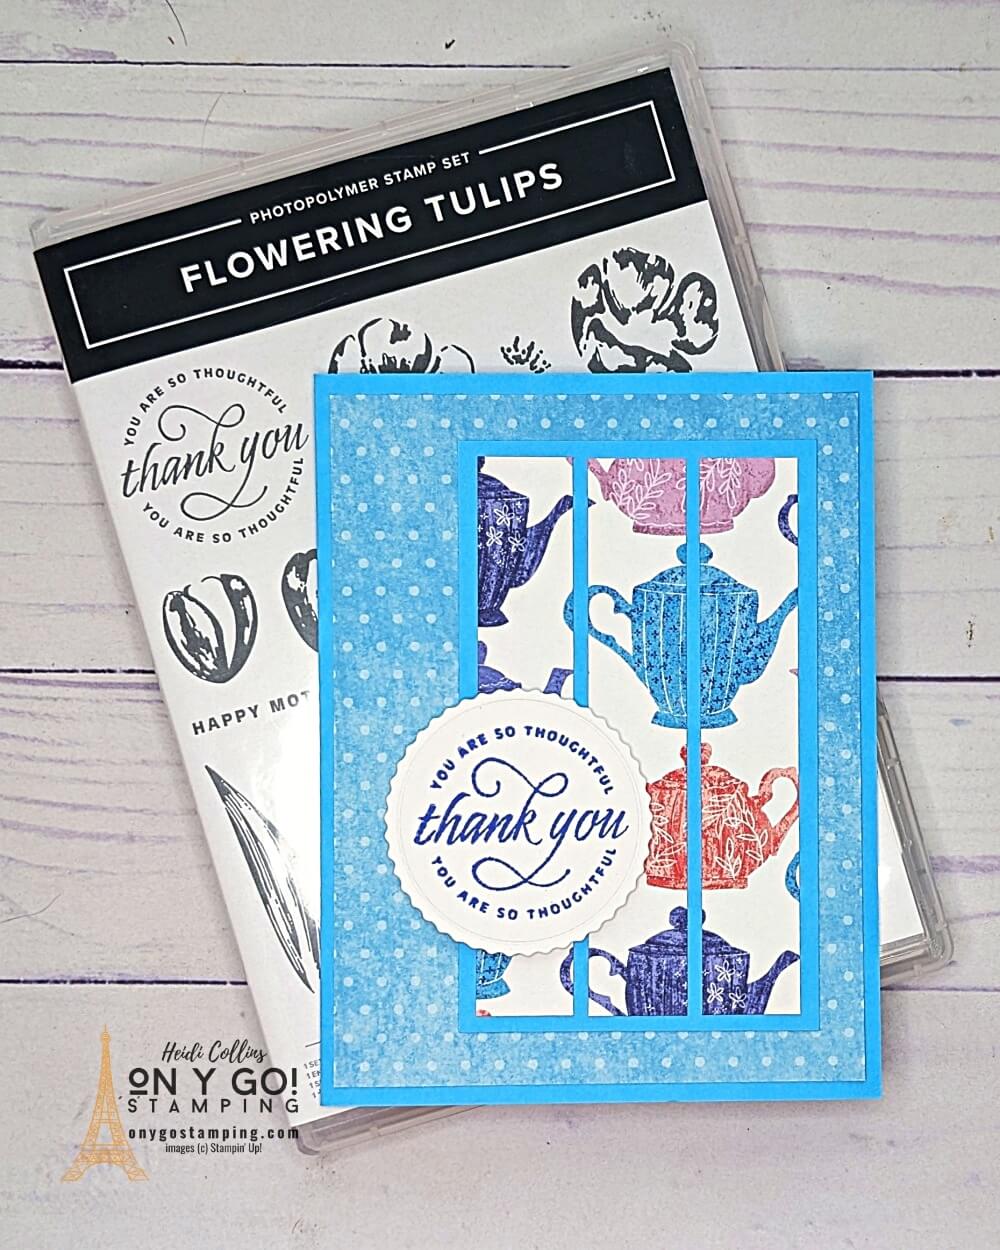 The the Flowering Tulips stamp set from Stampin' Up! and the Tea Boutique patterned paper to make a quick and easy handmade card based on a simple card sketch.